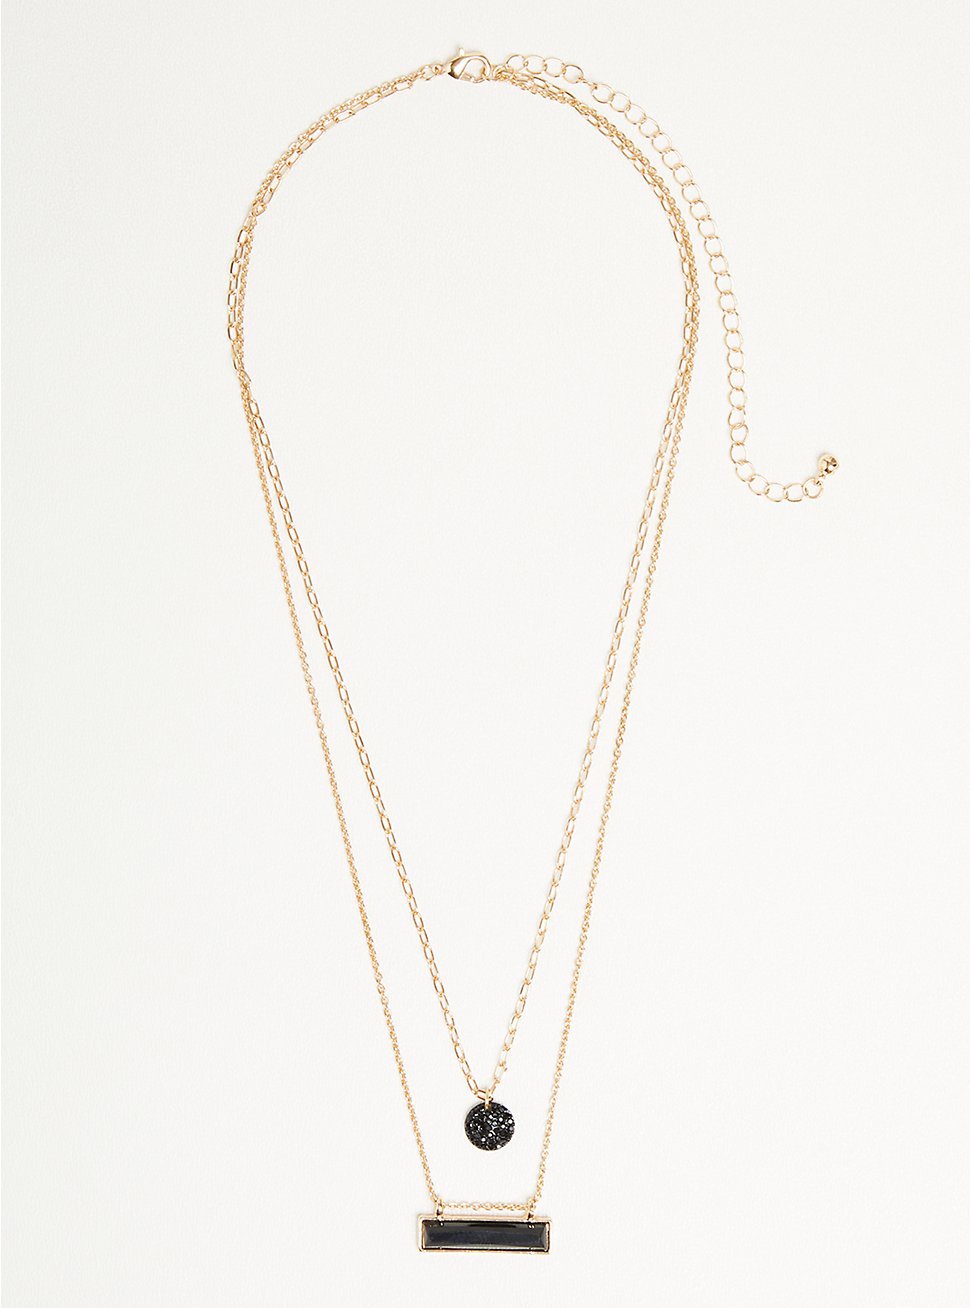 Layered Necklace with Black Bar & Disc - Gold Tone, , hi-res